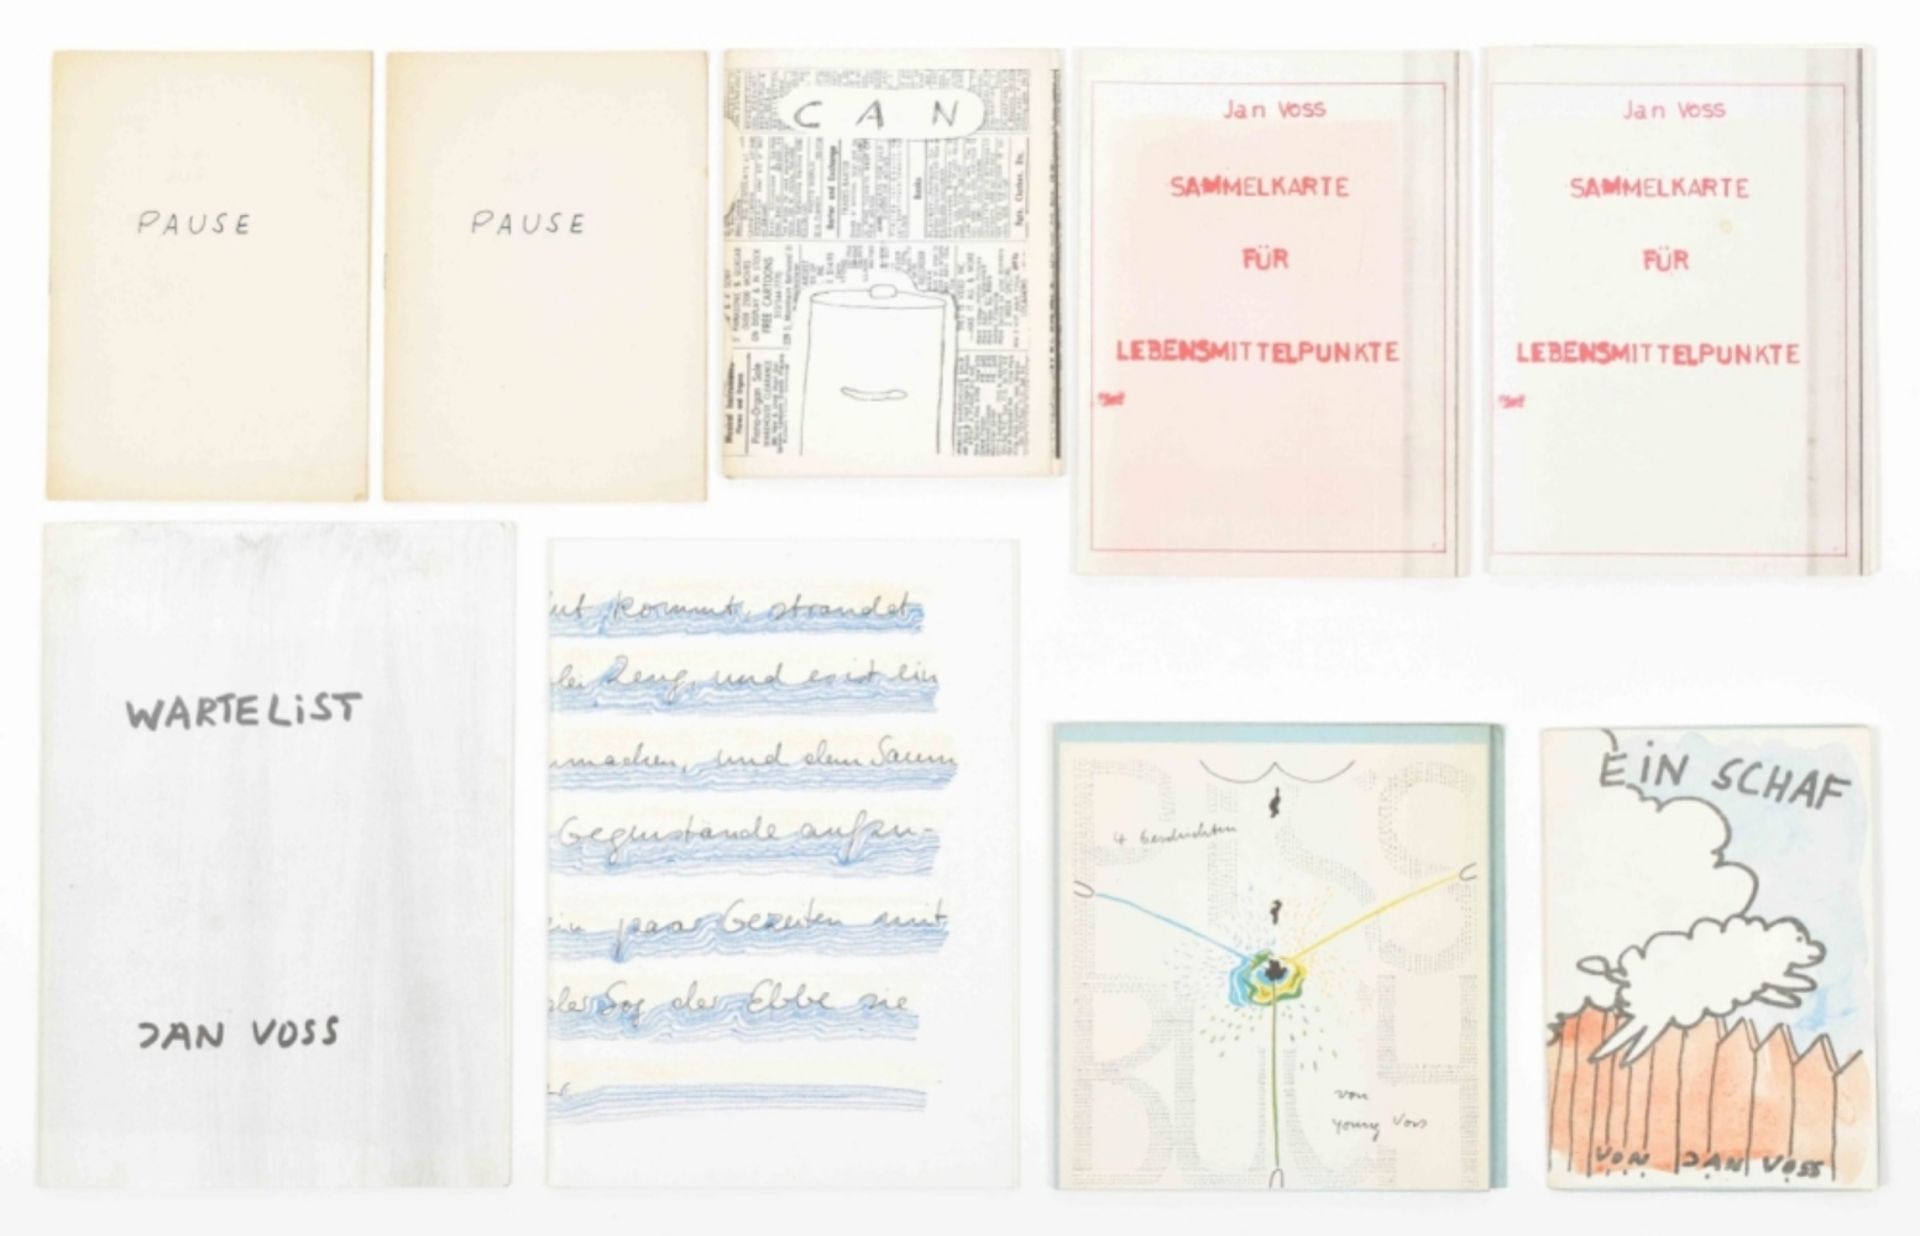 Jan Voss, large lot of small artists' books from the 1970s and 80s